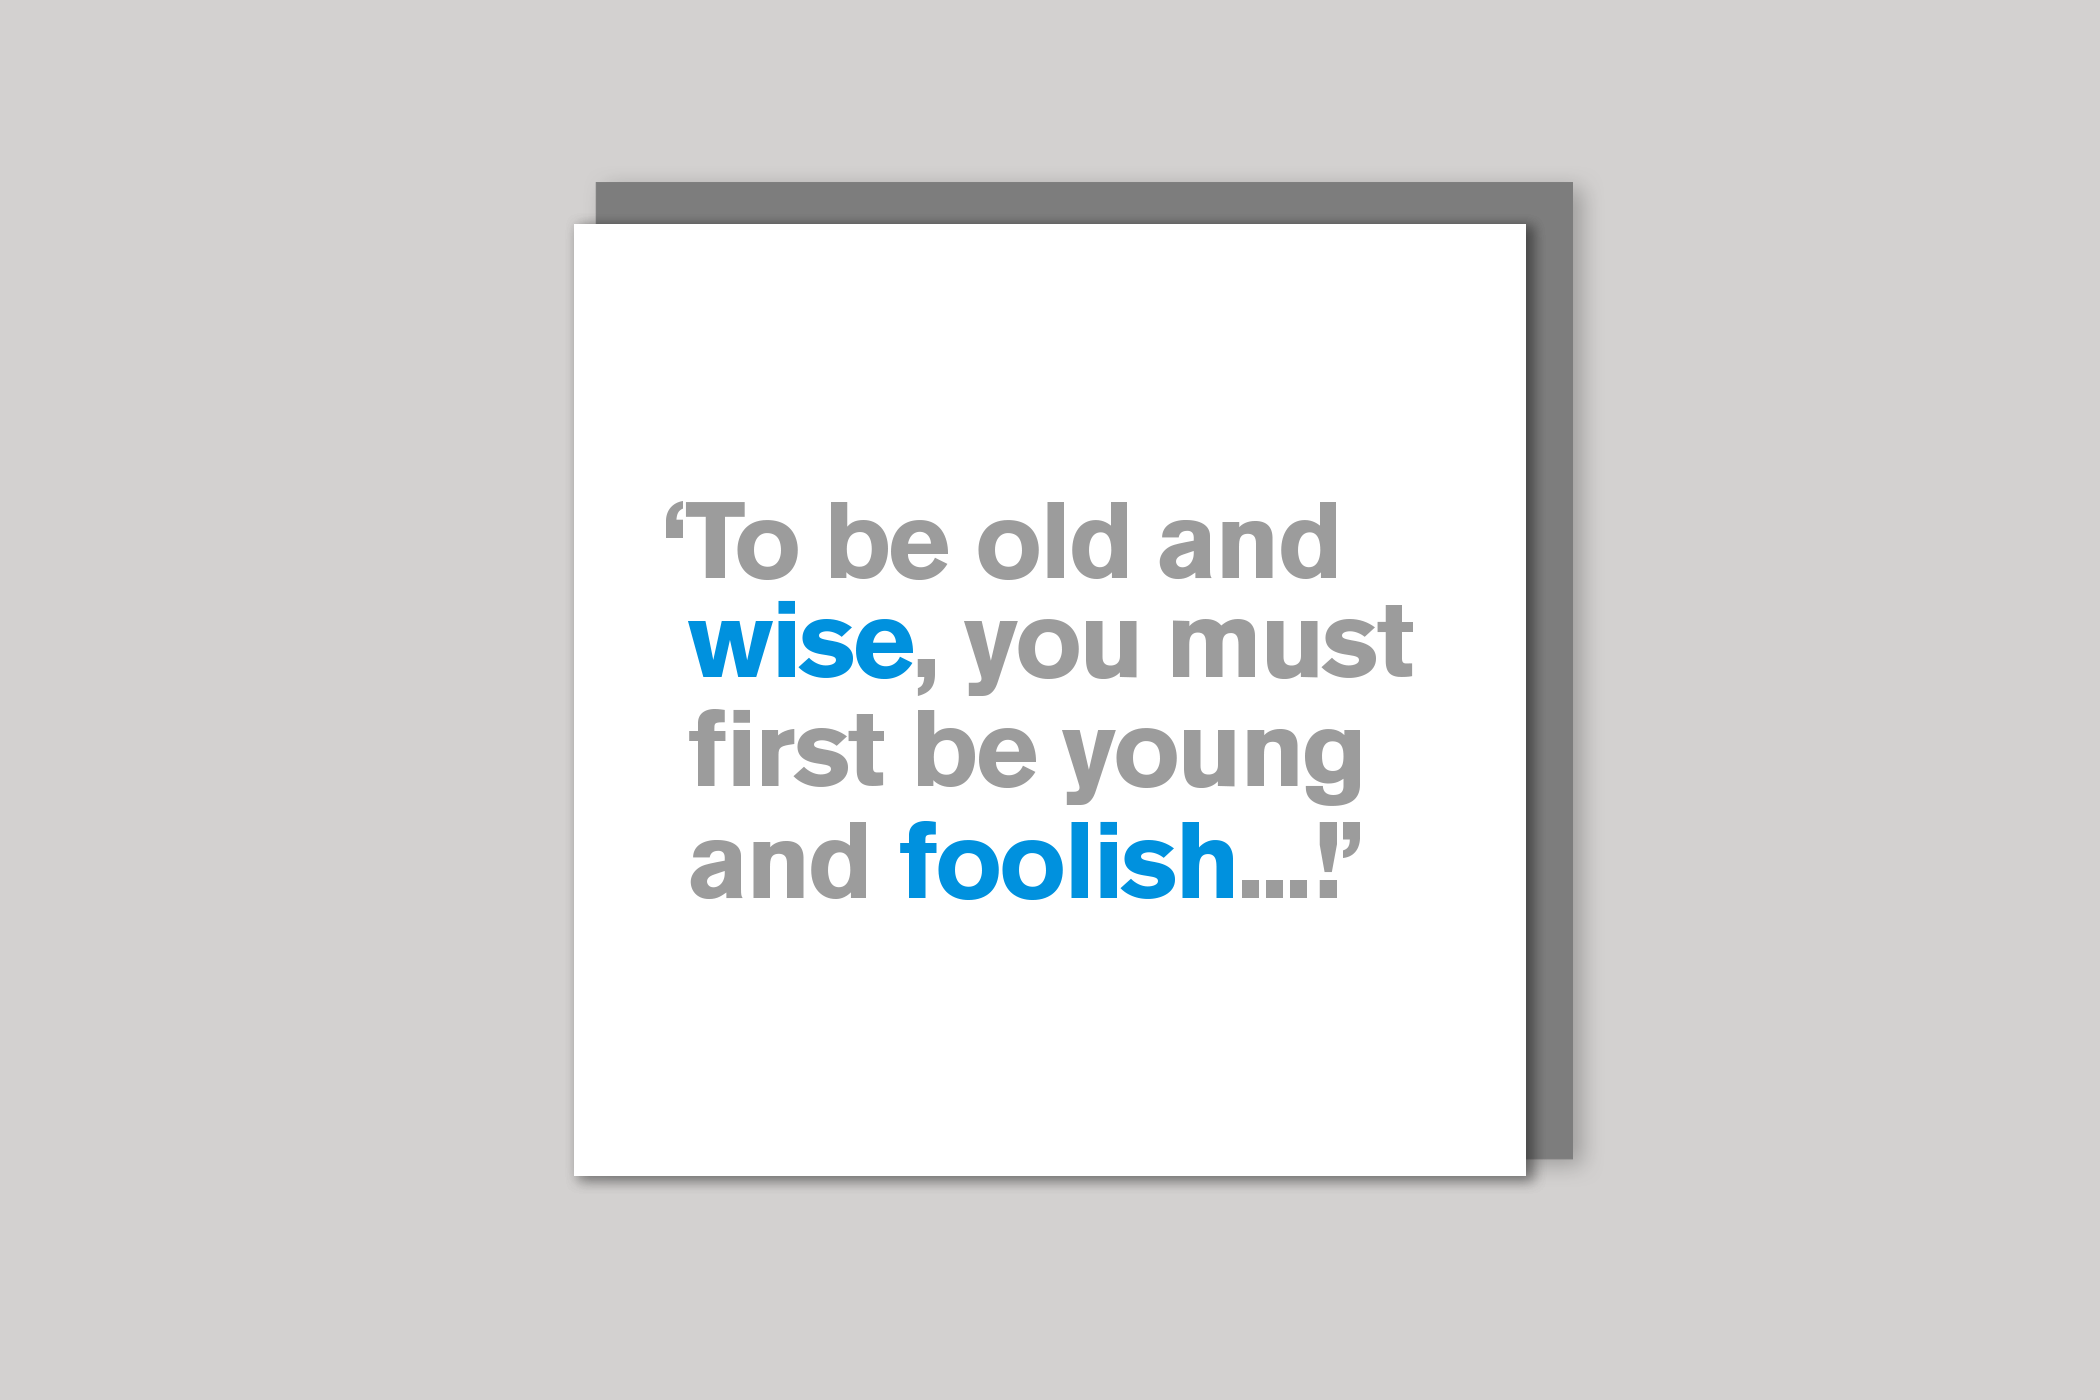 Old And Wise   21st card from Lyric range of quotation cards by Icon, back page.